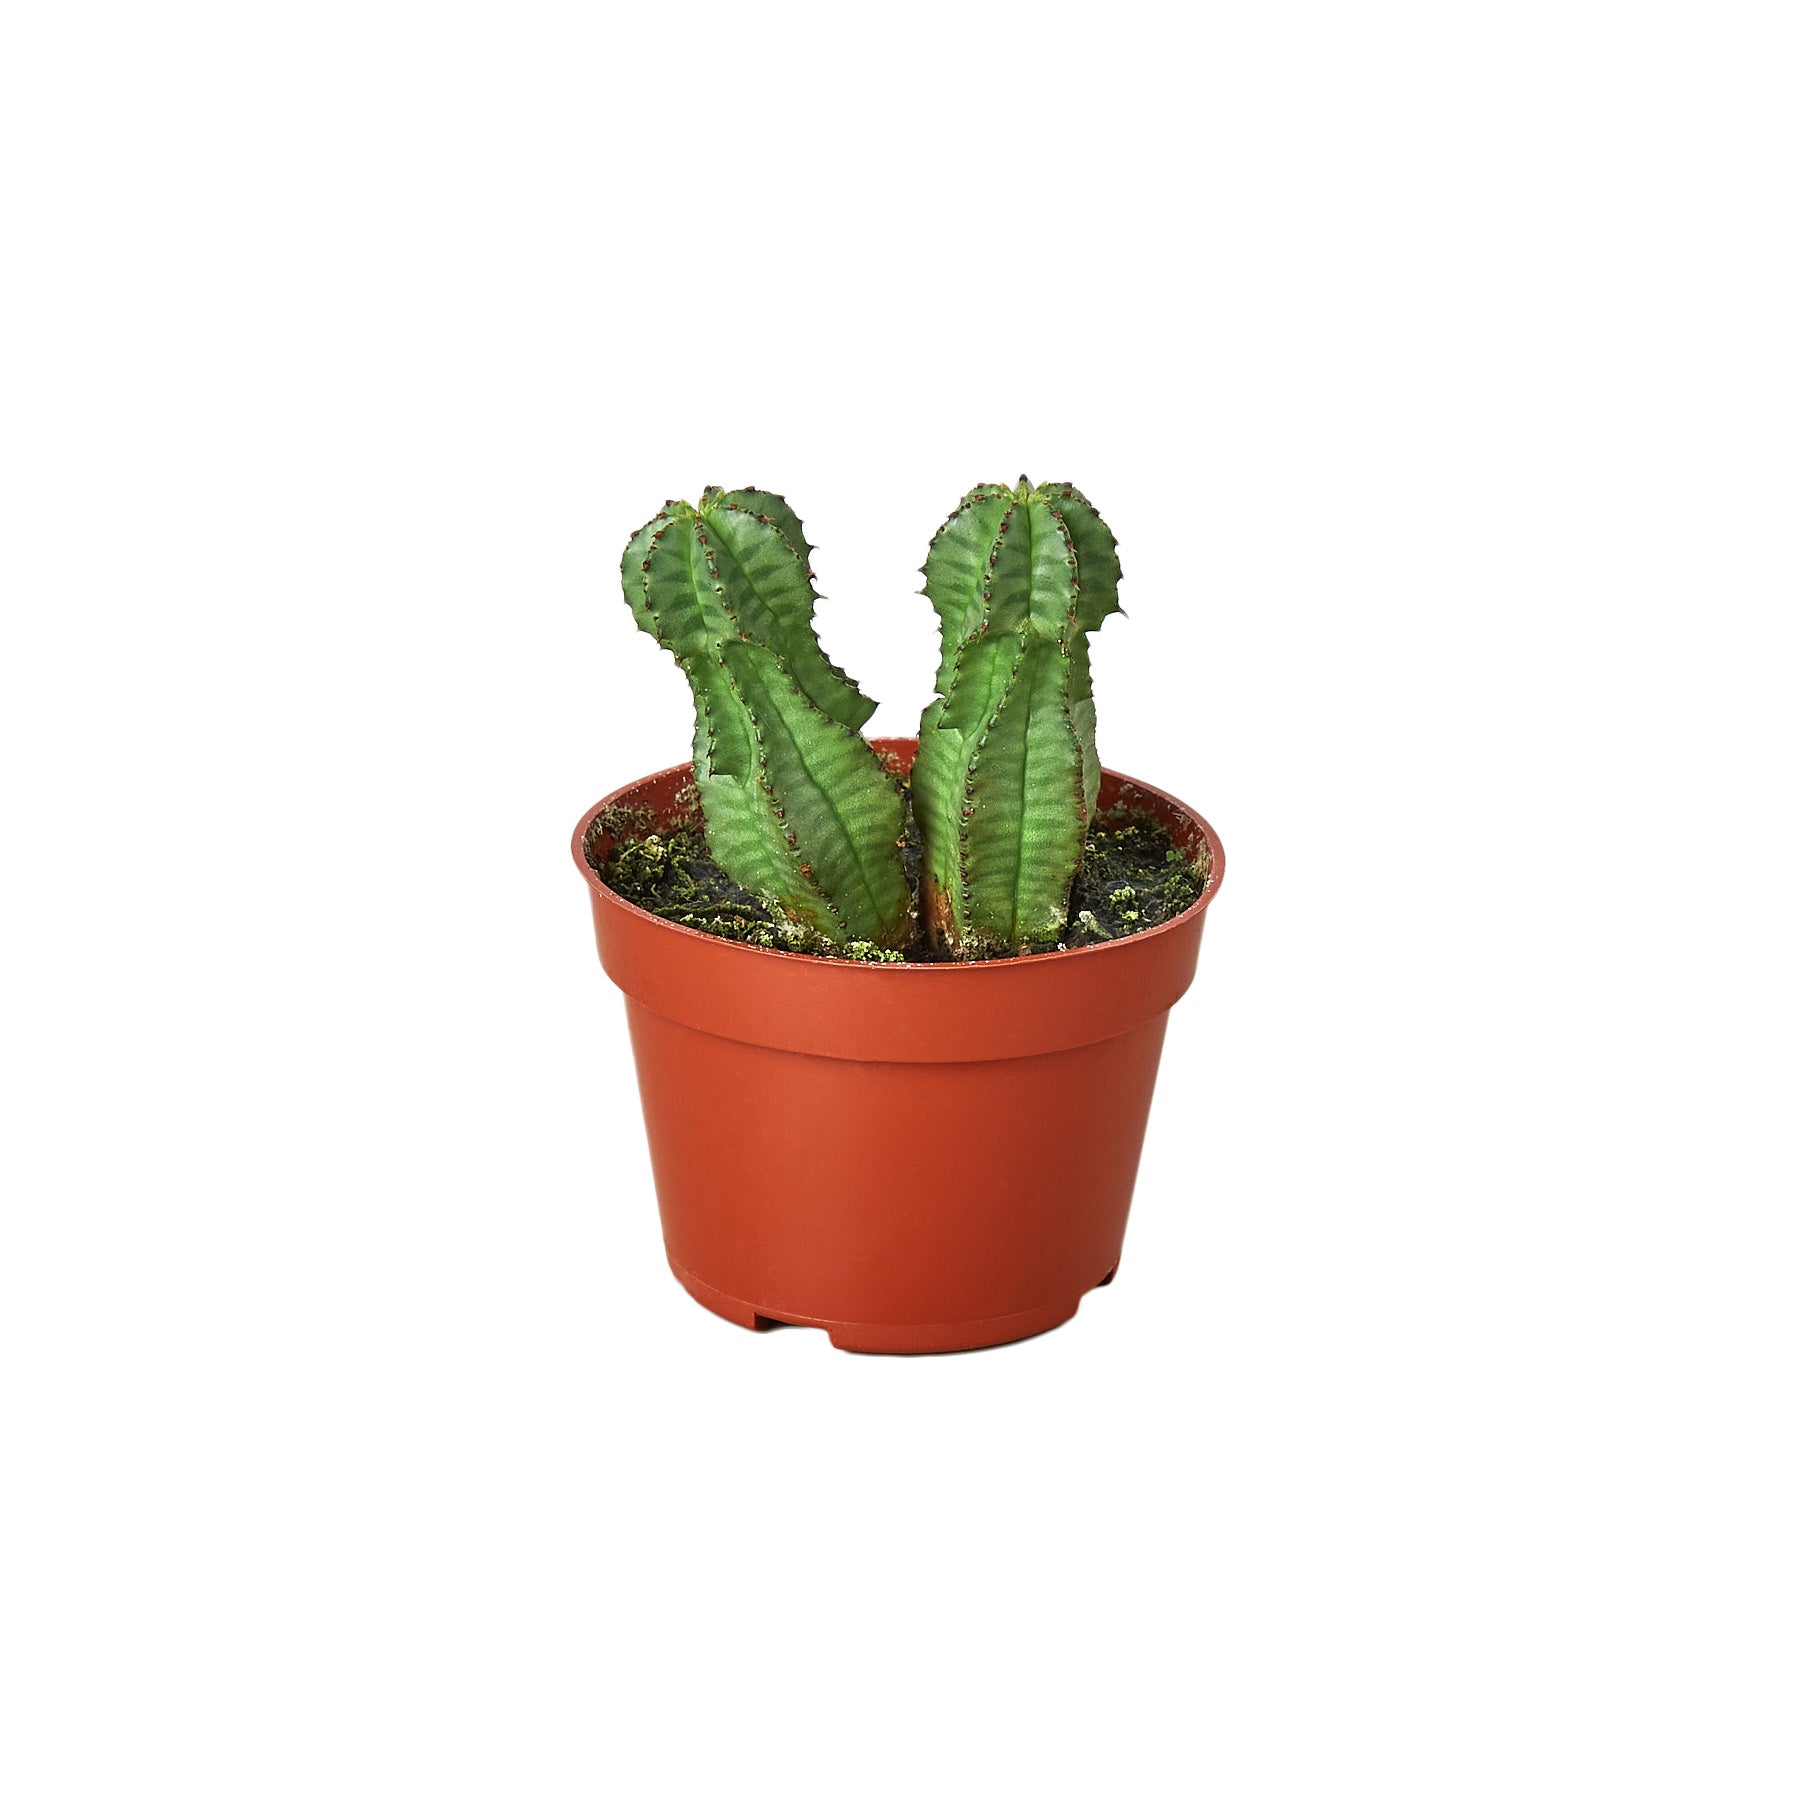 Two cactus plants in a pot on a white background, available at the best garden nursery near me.